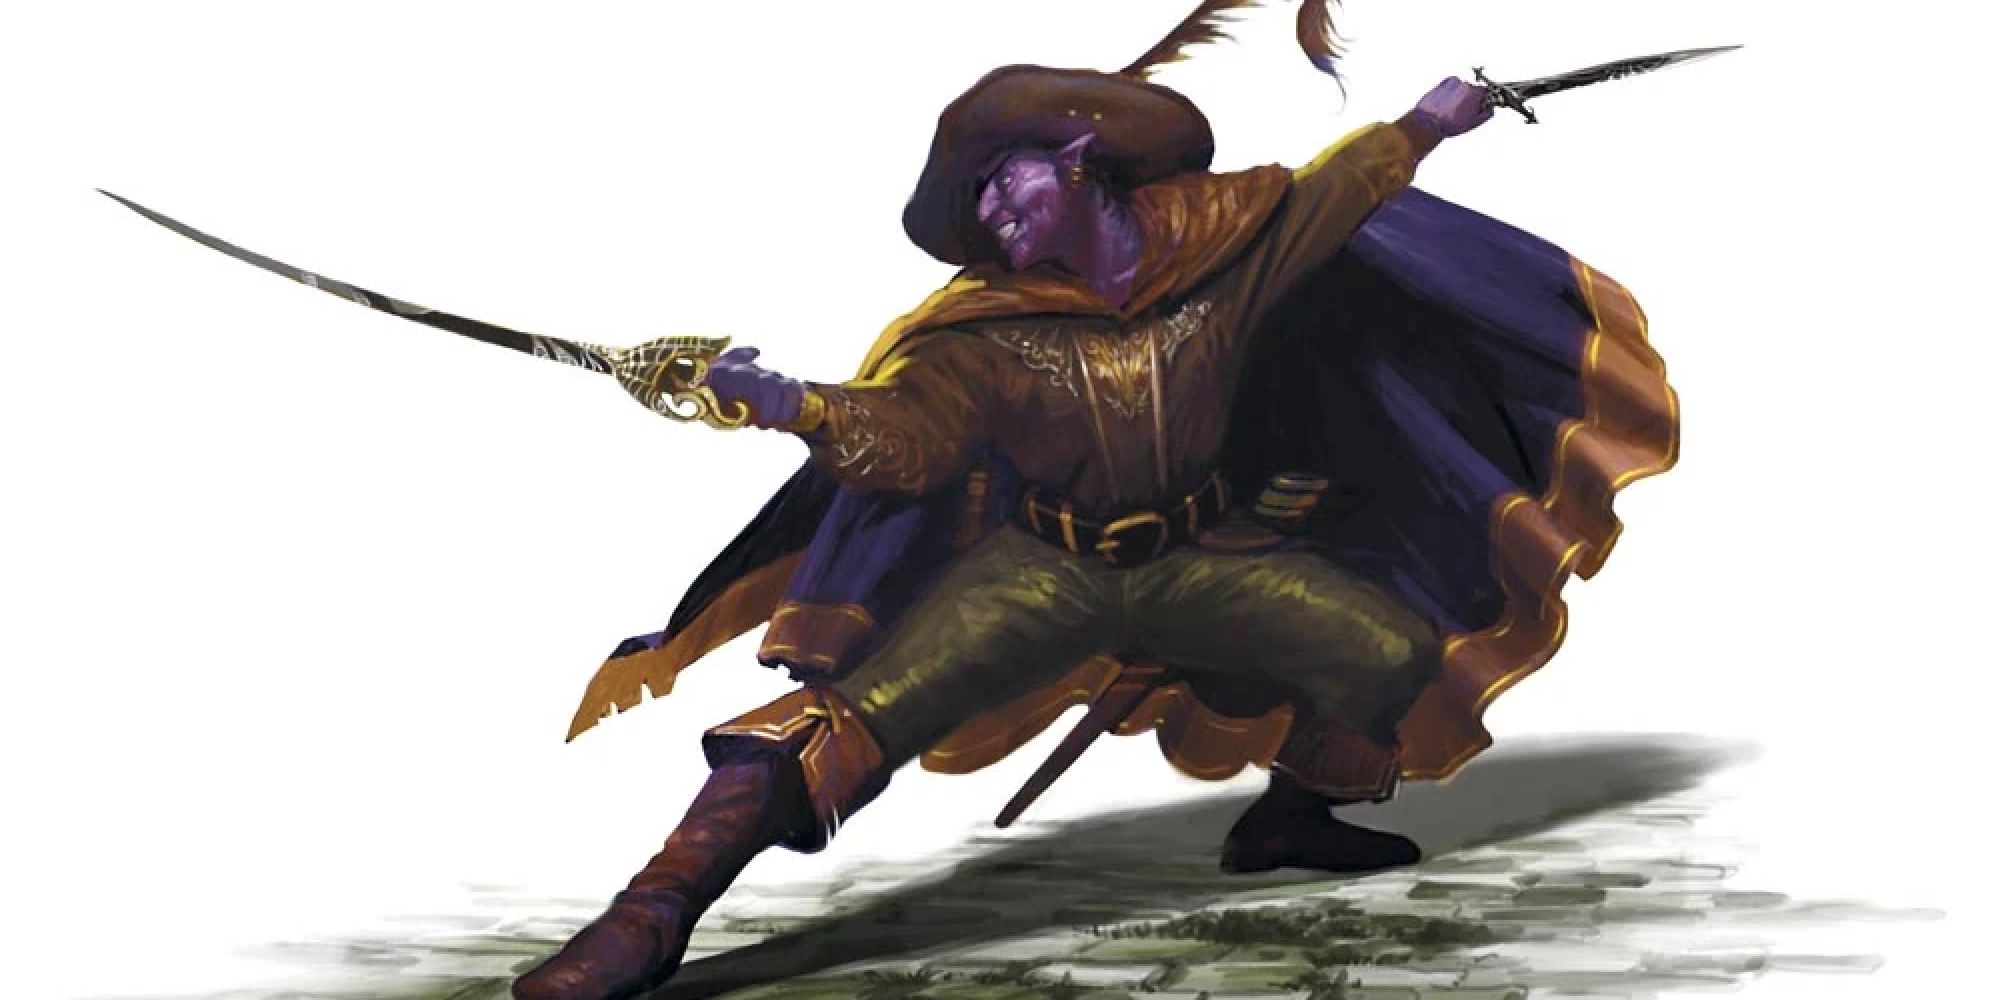 The purple Jarlaxle standing in a fighting stance with an excited expression on his face.